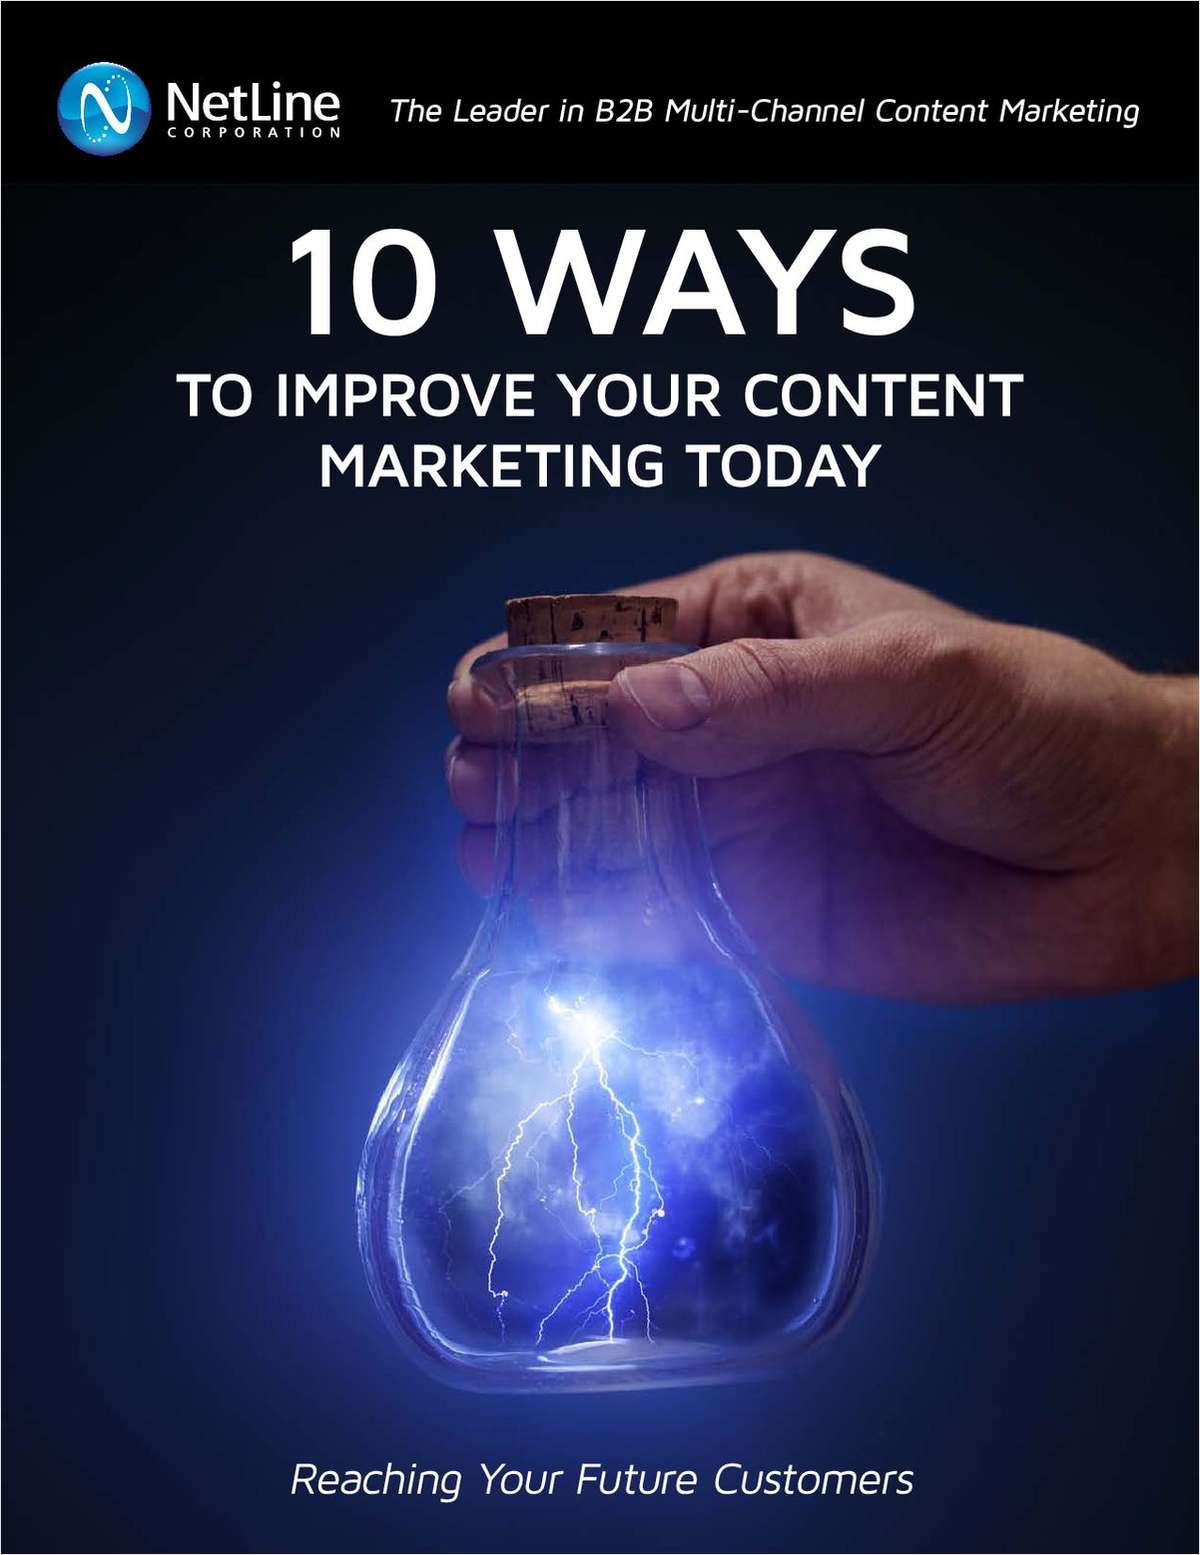 10 Ways to Improve Your Content Marketing Today